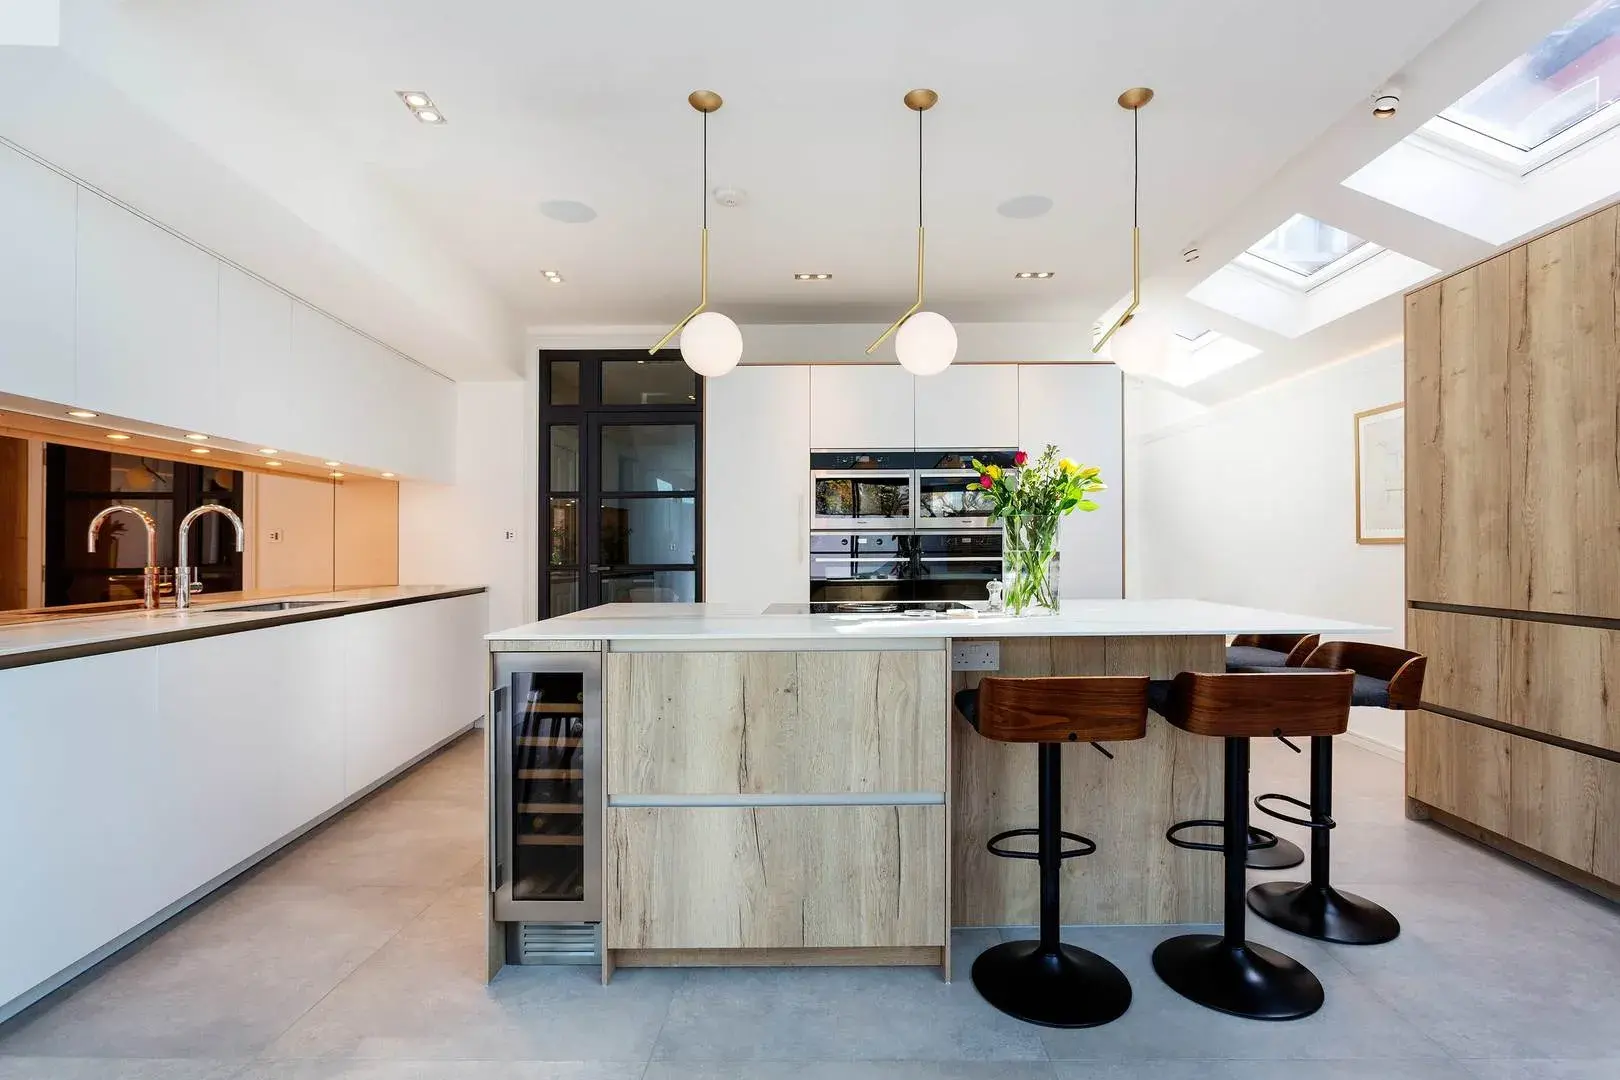 Alderbrook Road, holiday home in Clapham, London